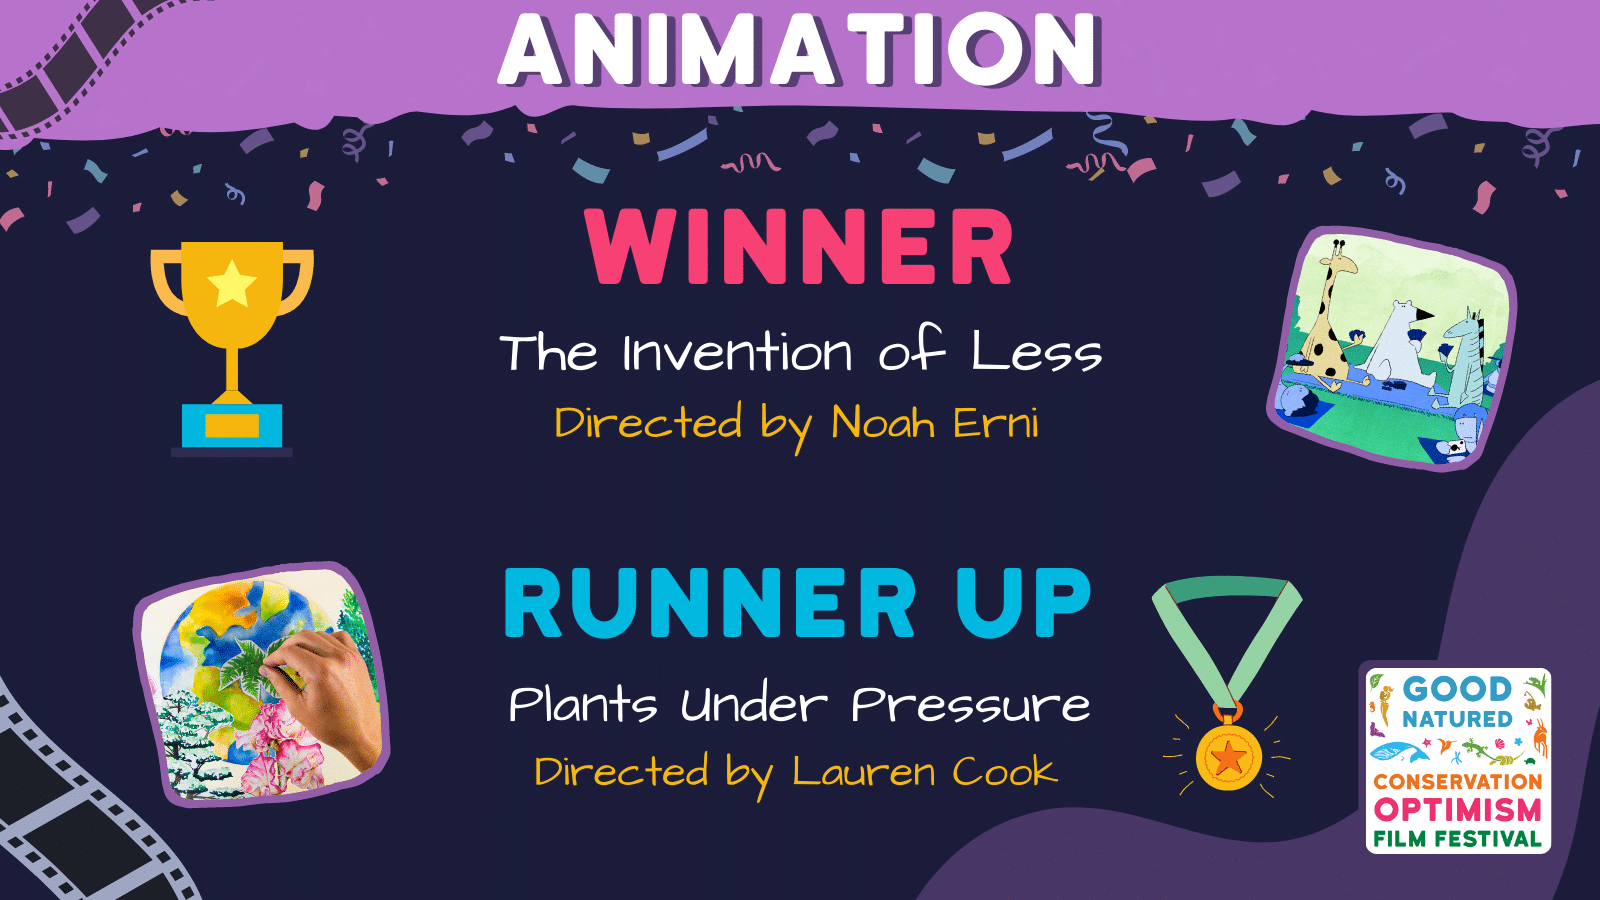 The Runner Up in the animation category is: Plants Under Pressure - Directed by Lauren Cook